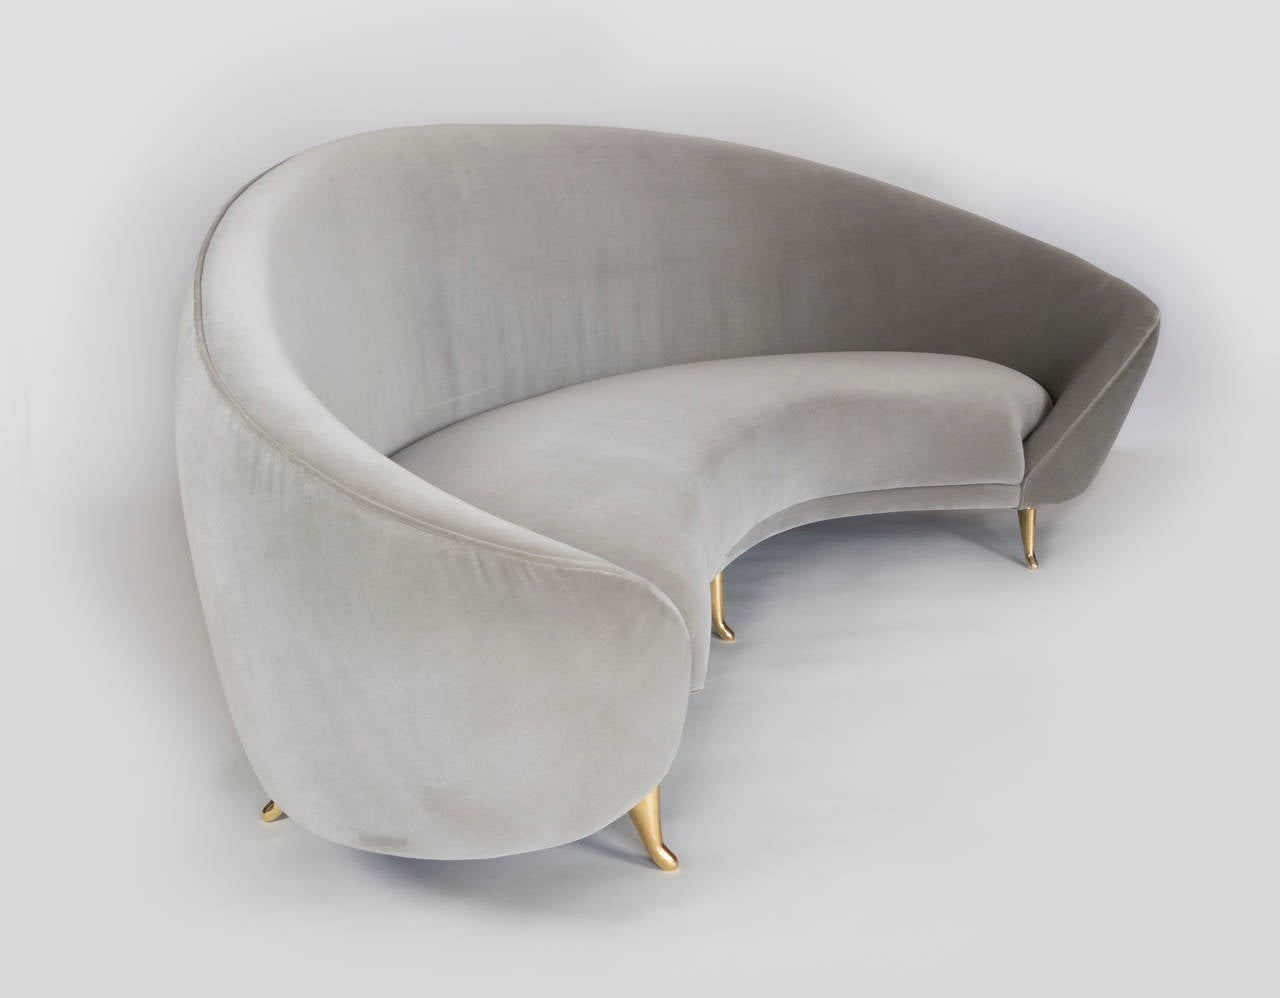 This chic sofa, reminiscent of the 1960s, has elegant lines with gracious curves. The brass feet add to its sophistication with their delicate design. It will surely be the focal point of any room.  The kidney shape of the sofa provides plenty of